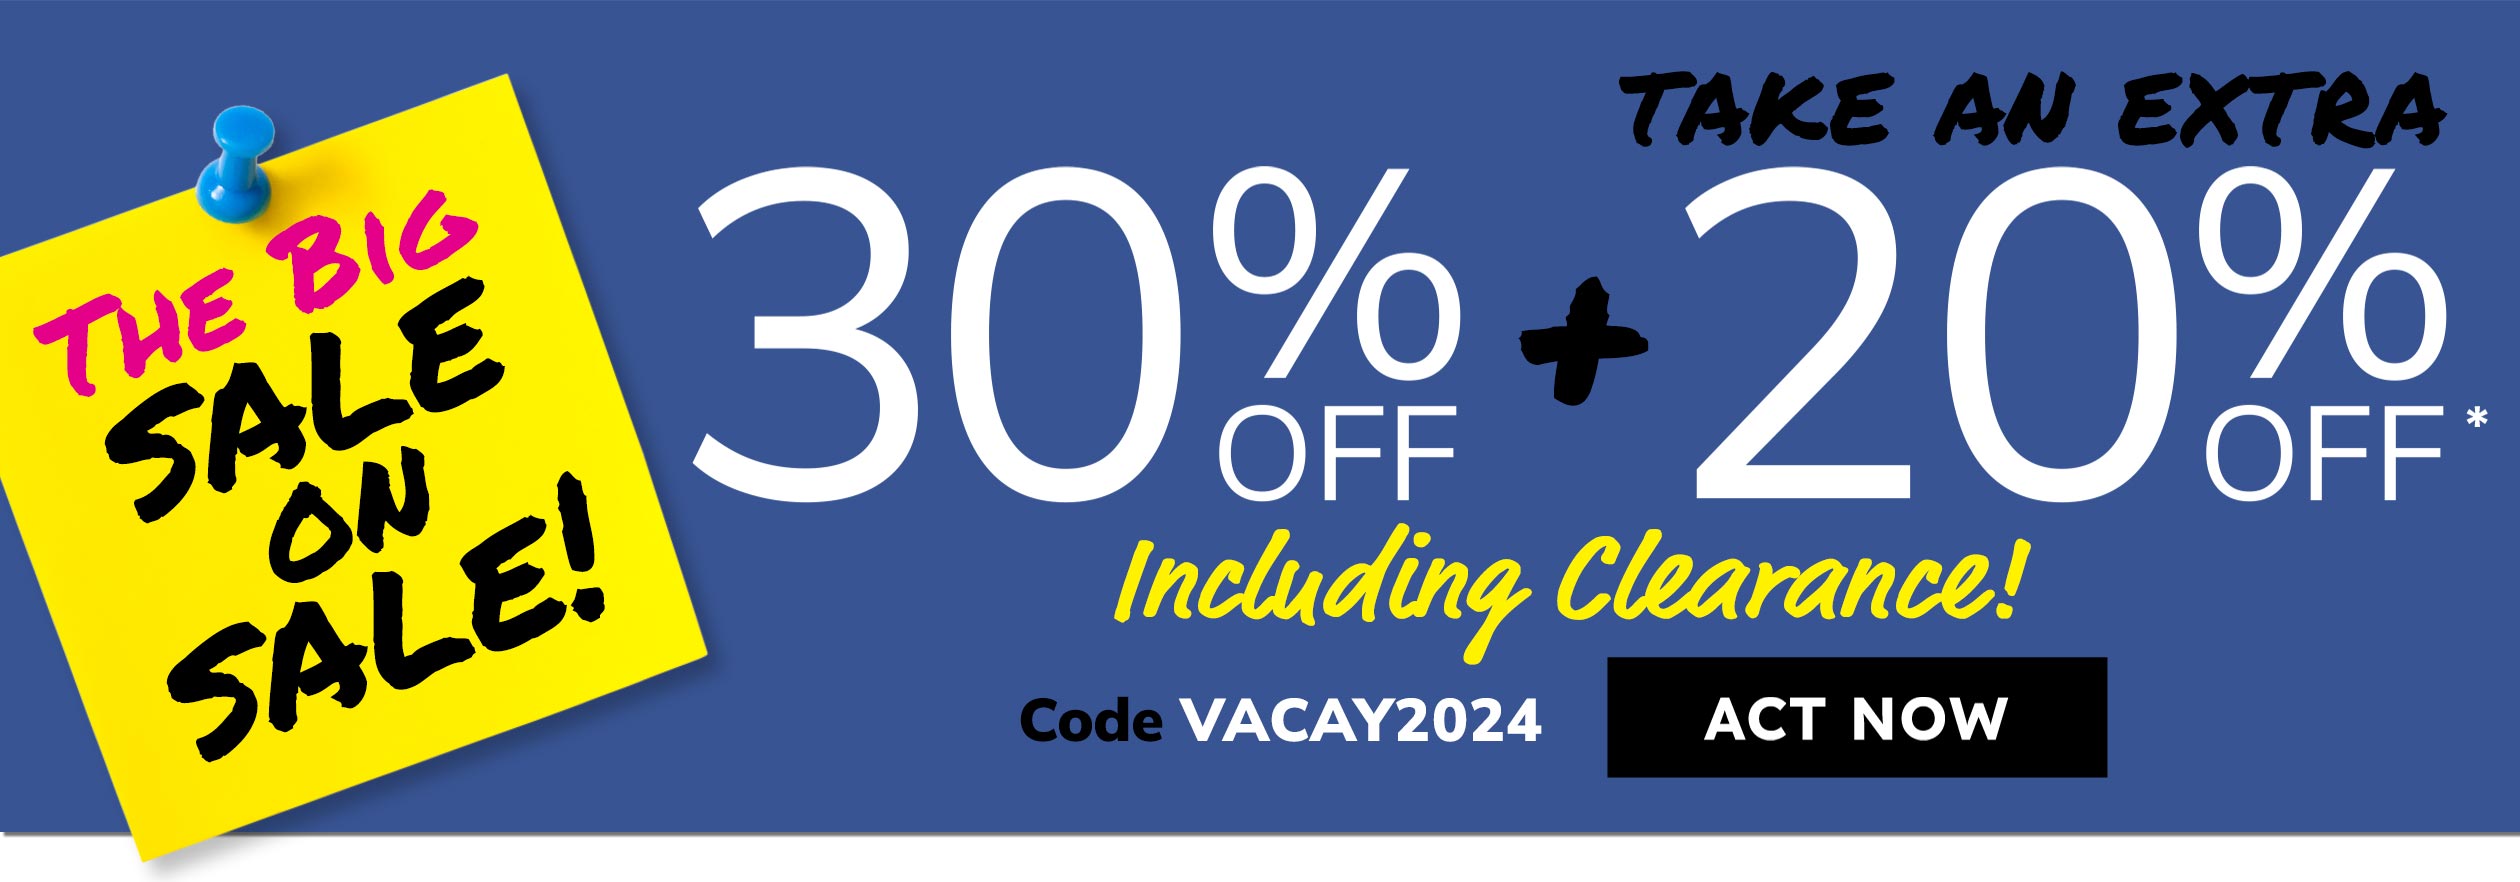 Sale on Sale 30% off plus 20% off including clearance. Use code: VACAY20 - act now